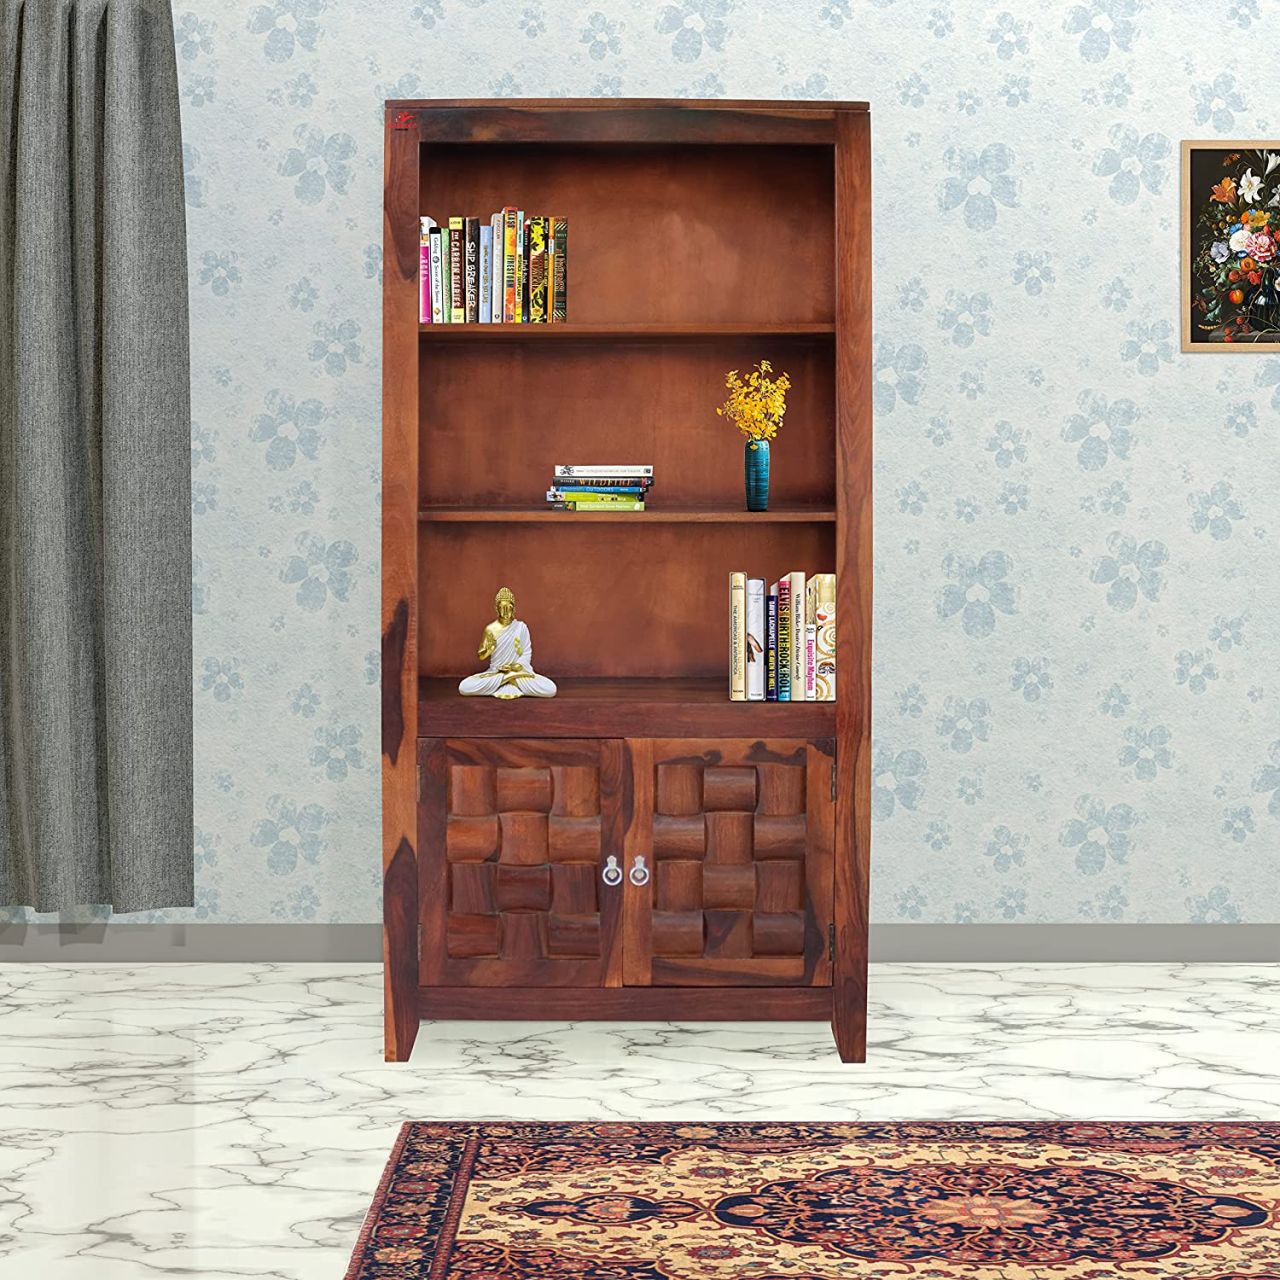 Aaram By Zebrs Solid Sheesham Wood Niwar Book Shelf with 2 Door Cabinet Storage for Home Living Room Library Office Furniture Wooden Bookcase Unit Display Rack (Honey Finish Pre-Assembled